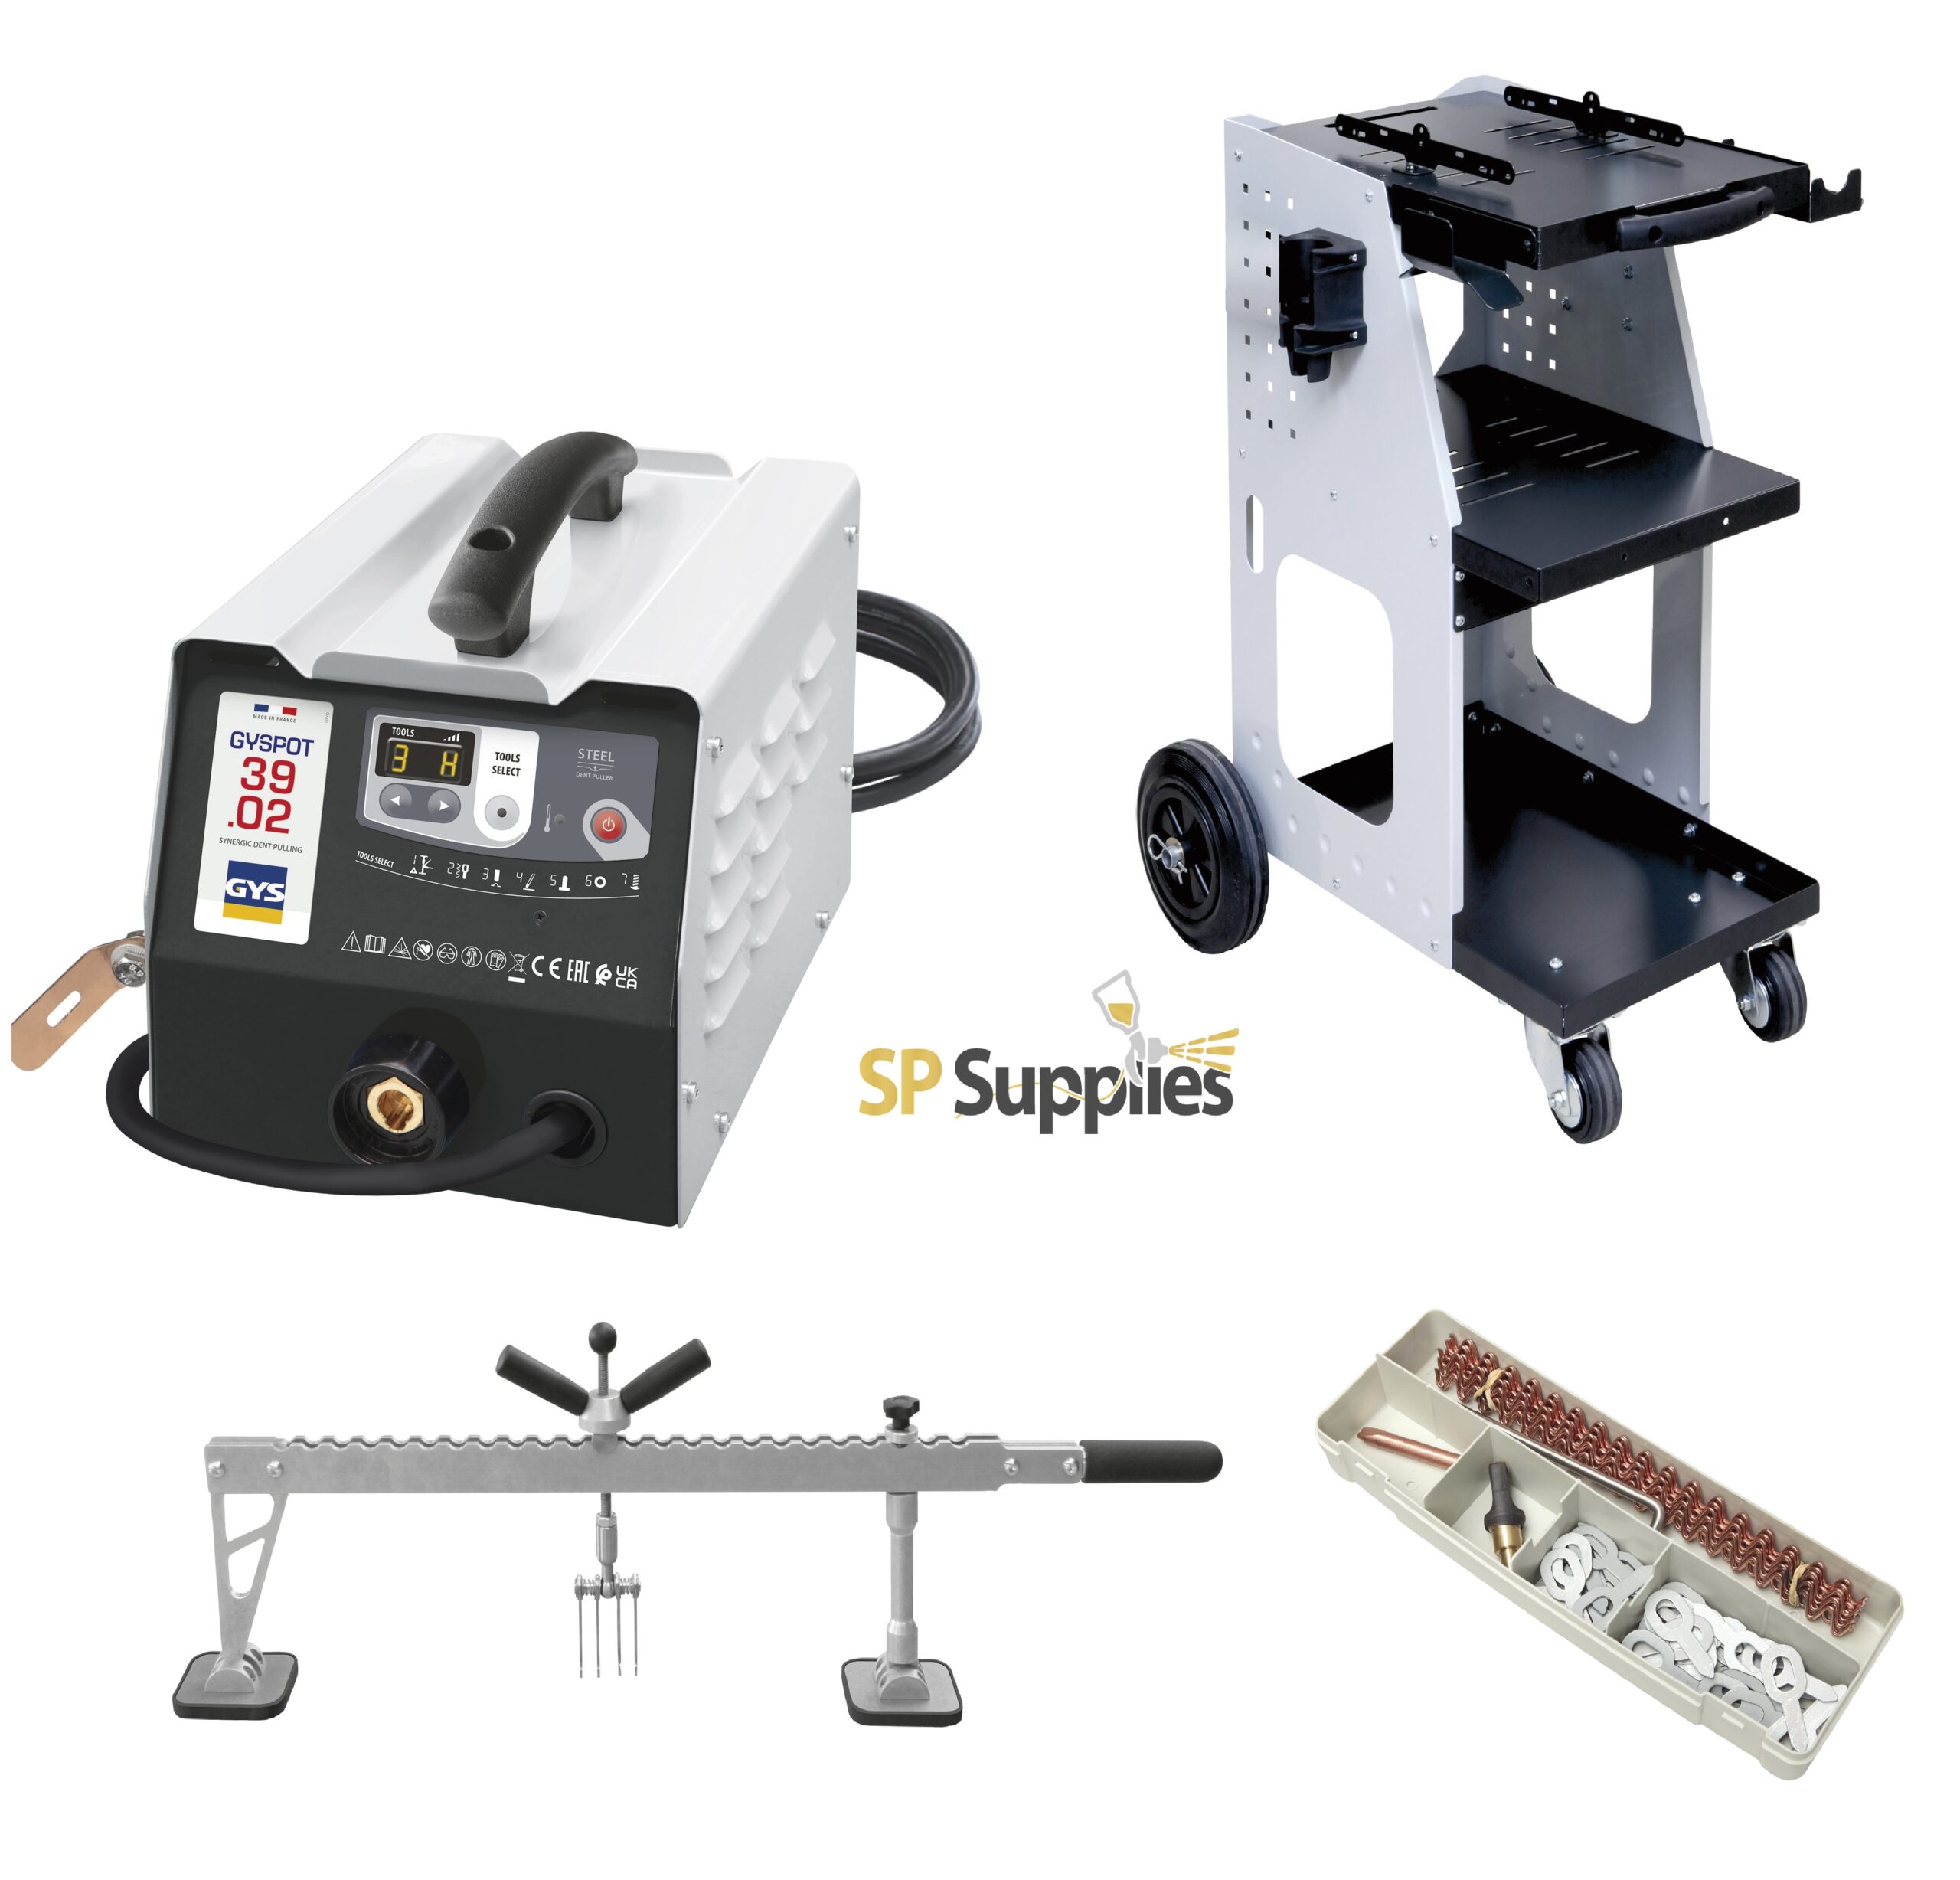 GYS NEW STYLE GYSPOT 39.02 KIT with 800 Trolley, Double Action Levelling Bar and Accessory Box